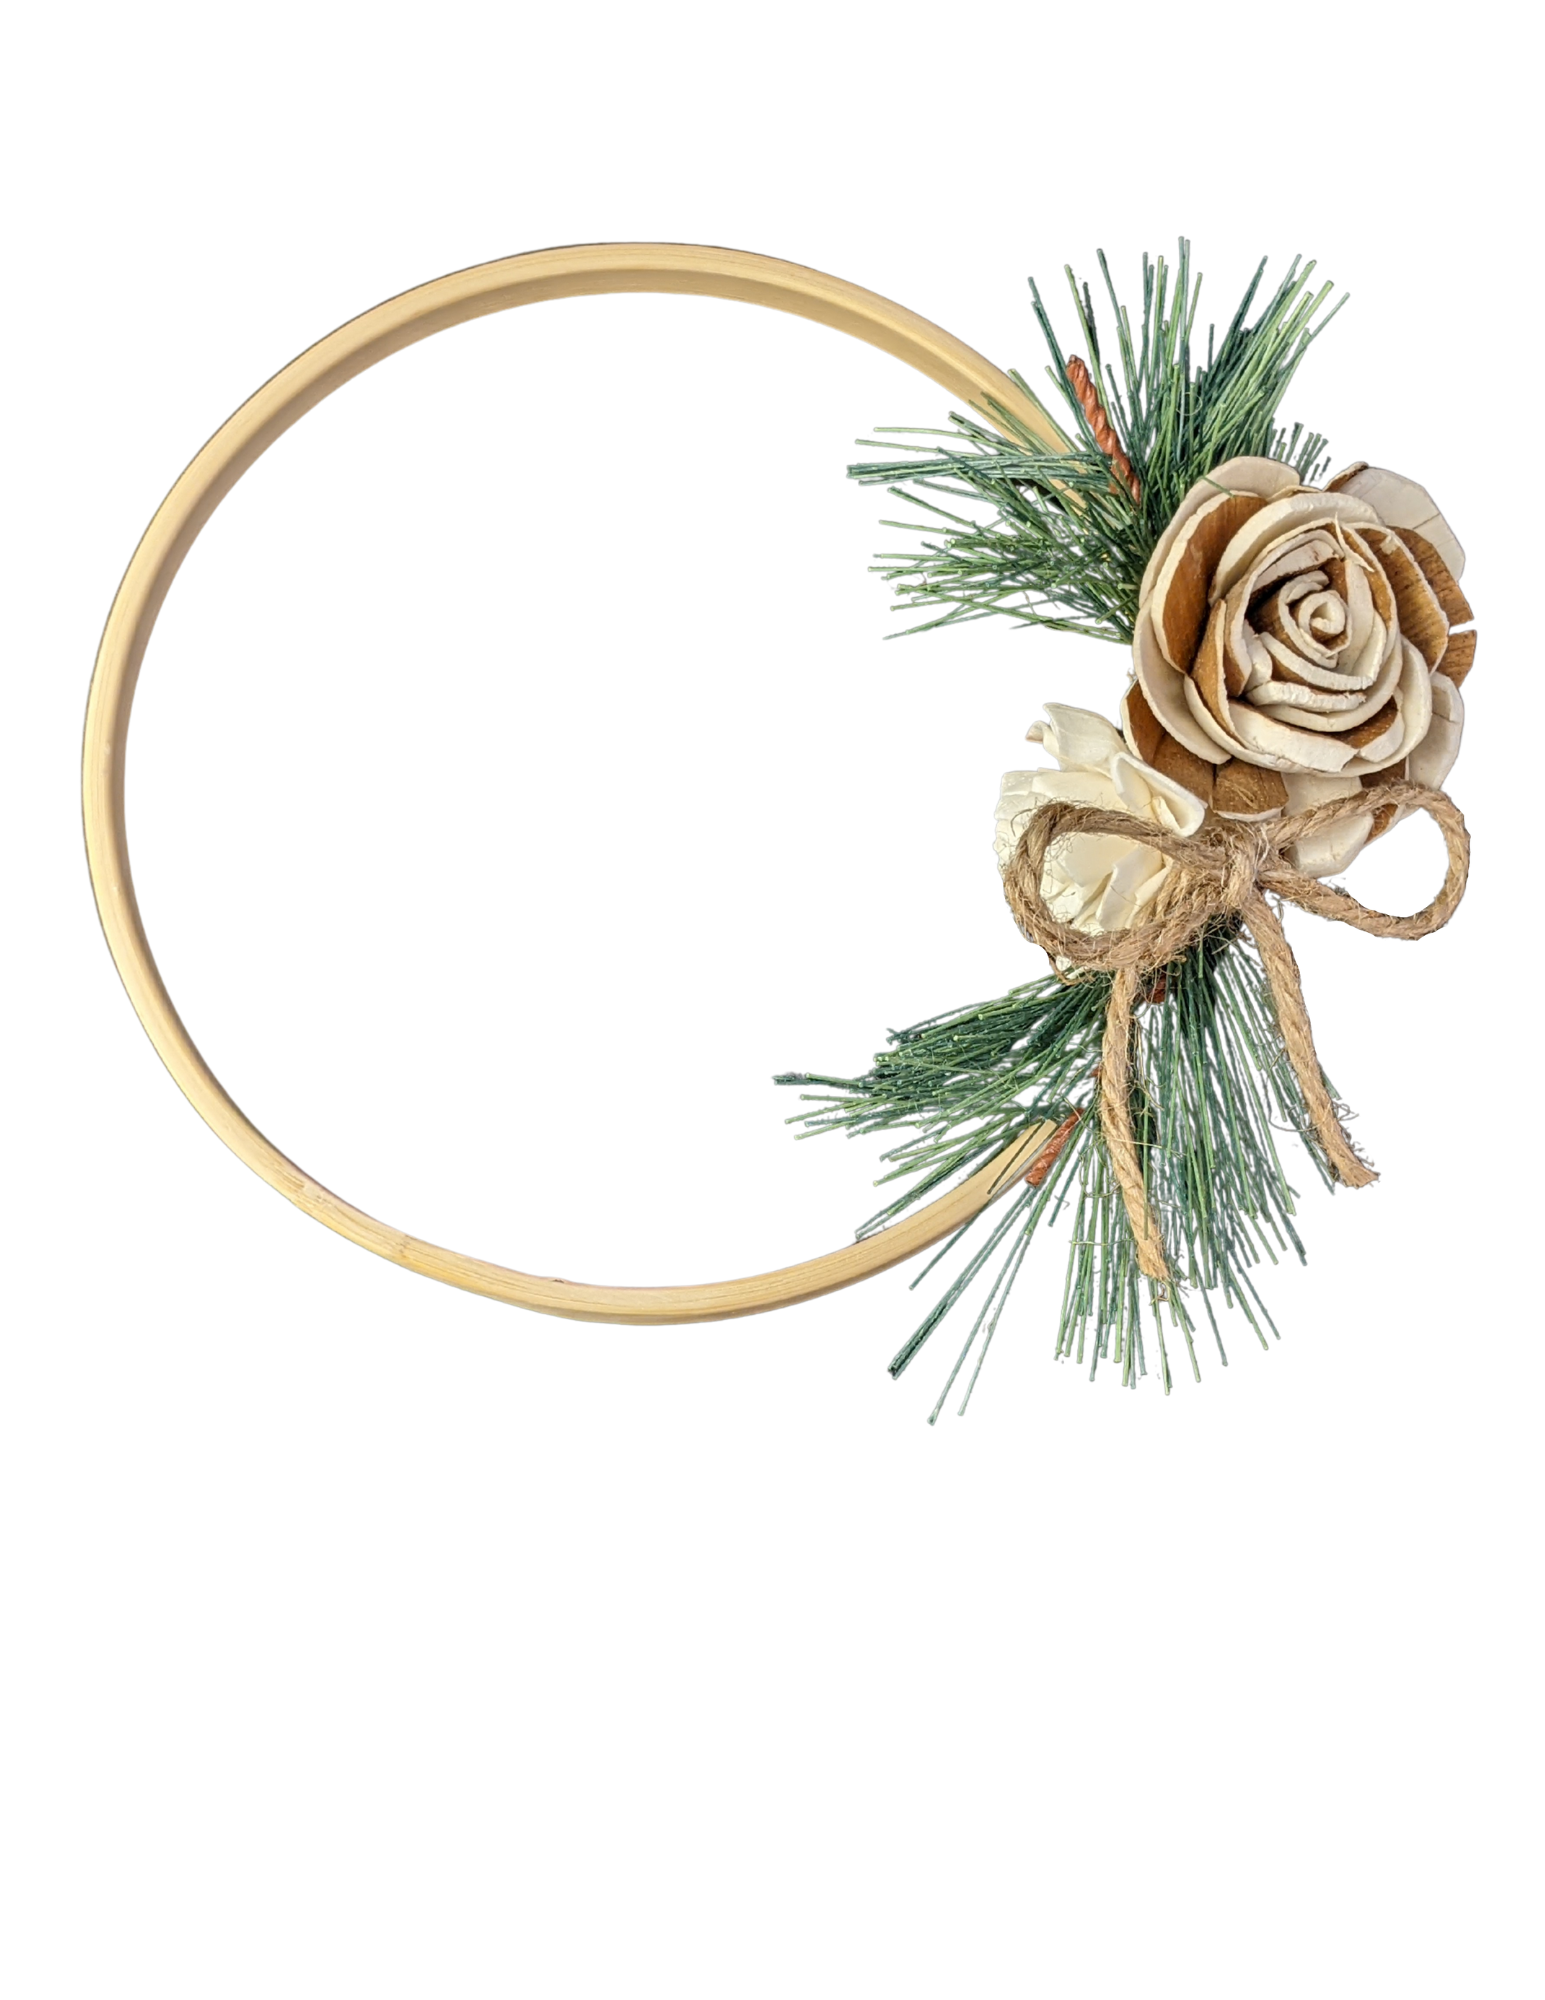 Wooden hoop with faux pine needles and sola wood flower on one side with a twine bow.